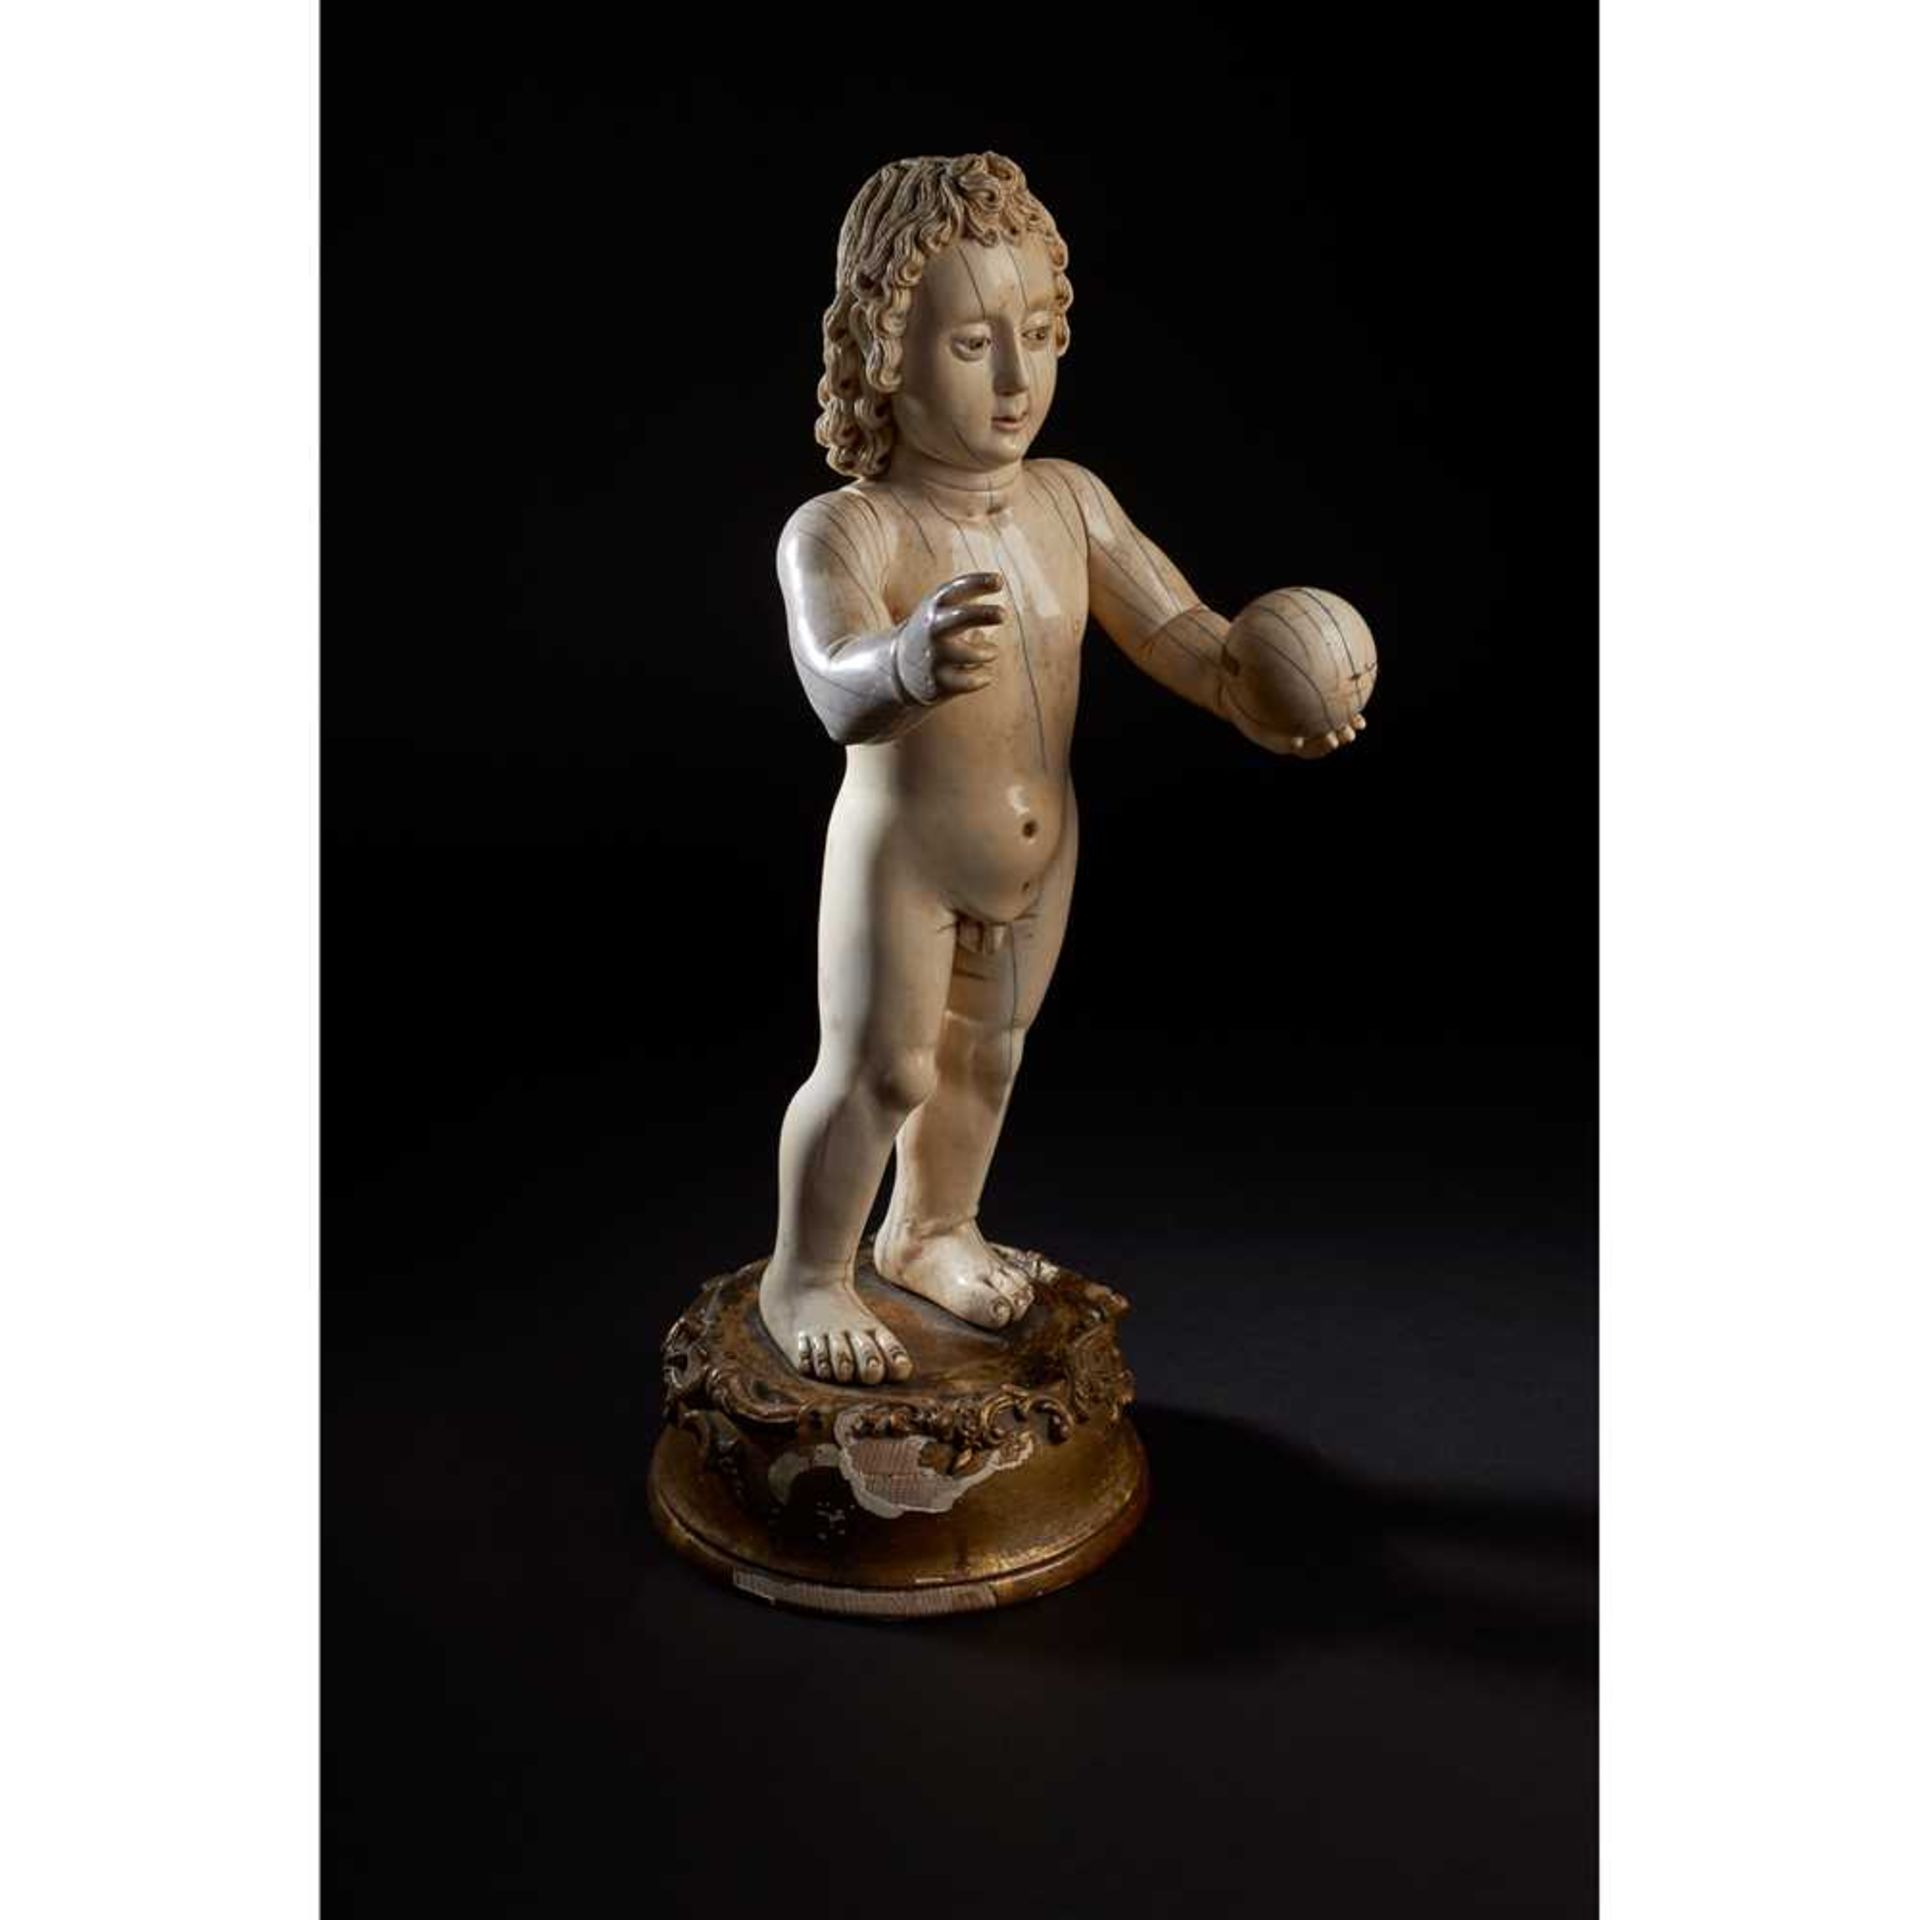 LARGE INDO-PORTUGUESE CARVED IVORY FIGURE OF THE INFANT CHRIST AS SALVATOR MUNDI, THE SAVIOUR OF THE - Image 7 of 7